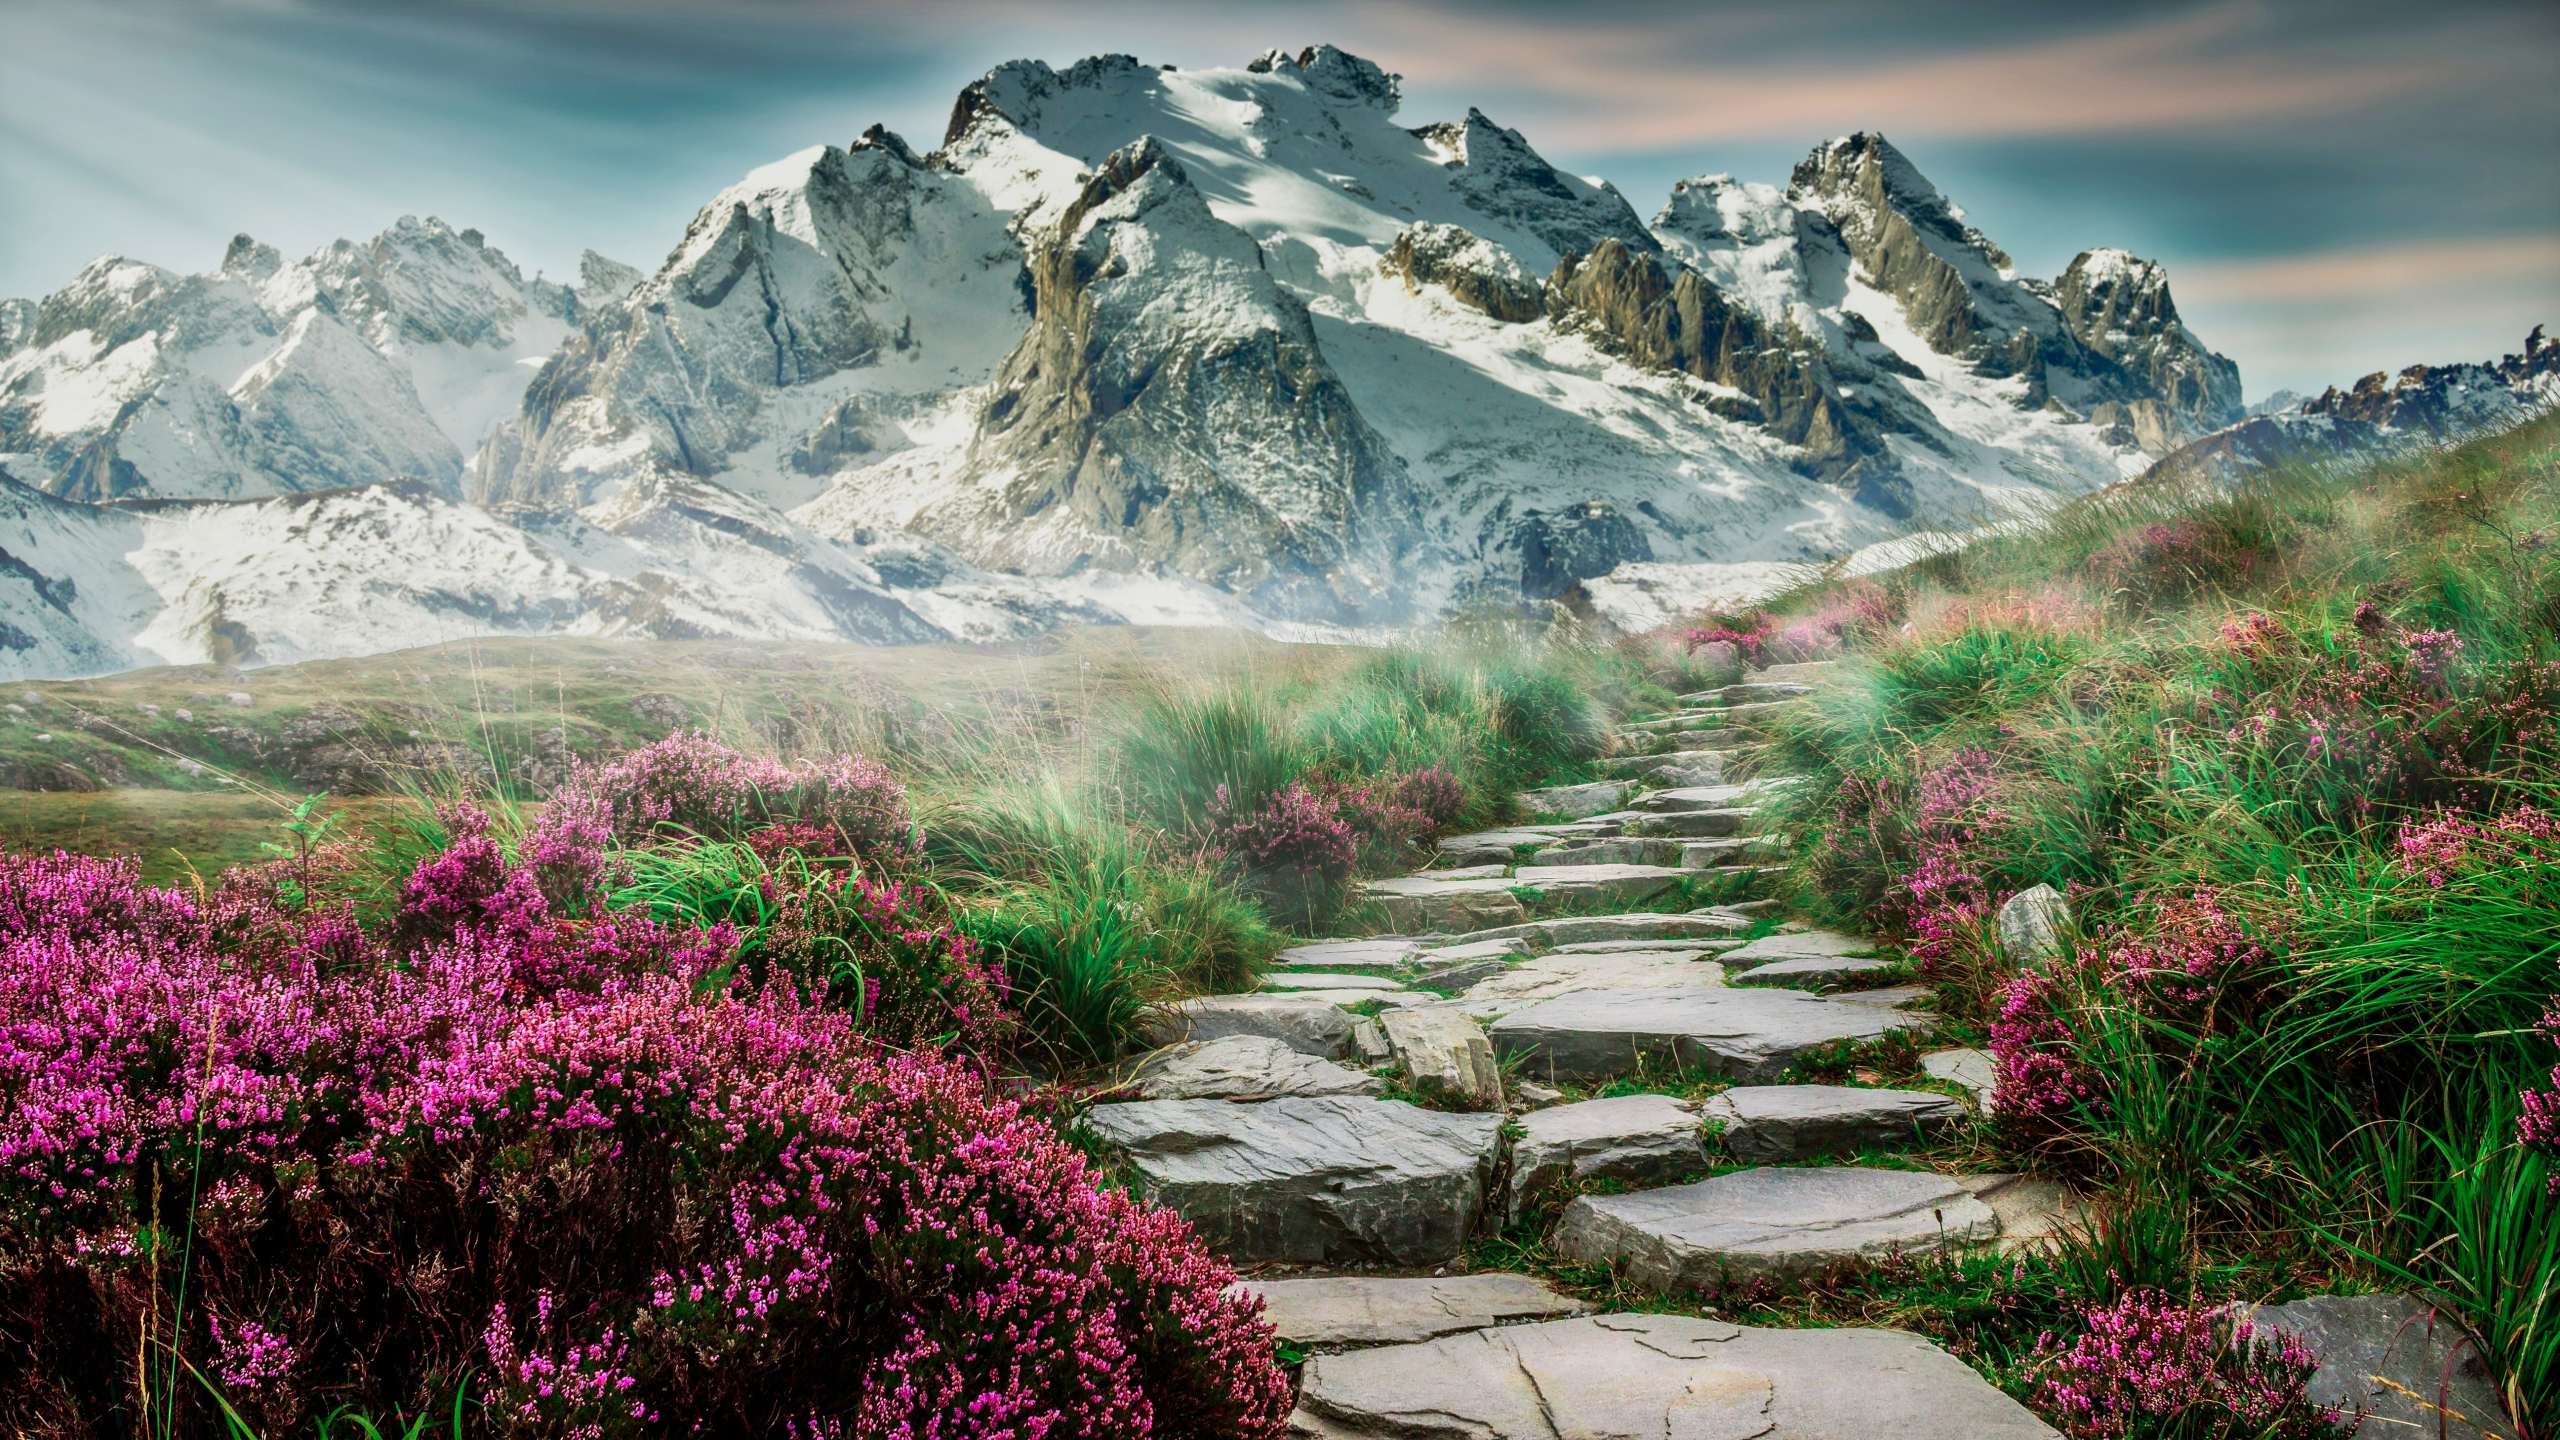 Download wallpaper 2560x1440 scenic, spring, mountain, rocks steps, pathway, dual wide 16:9 2560x1440 HD background, 23369